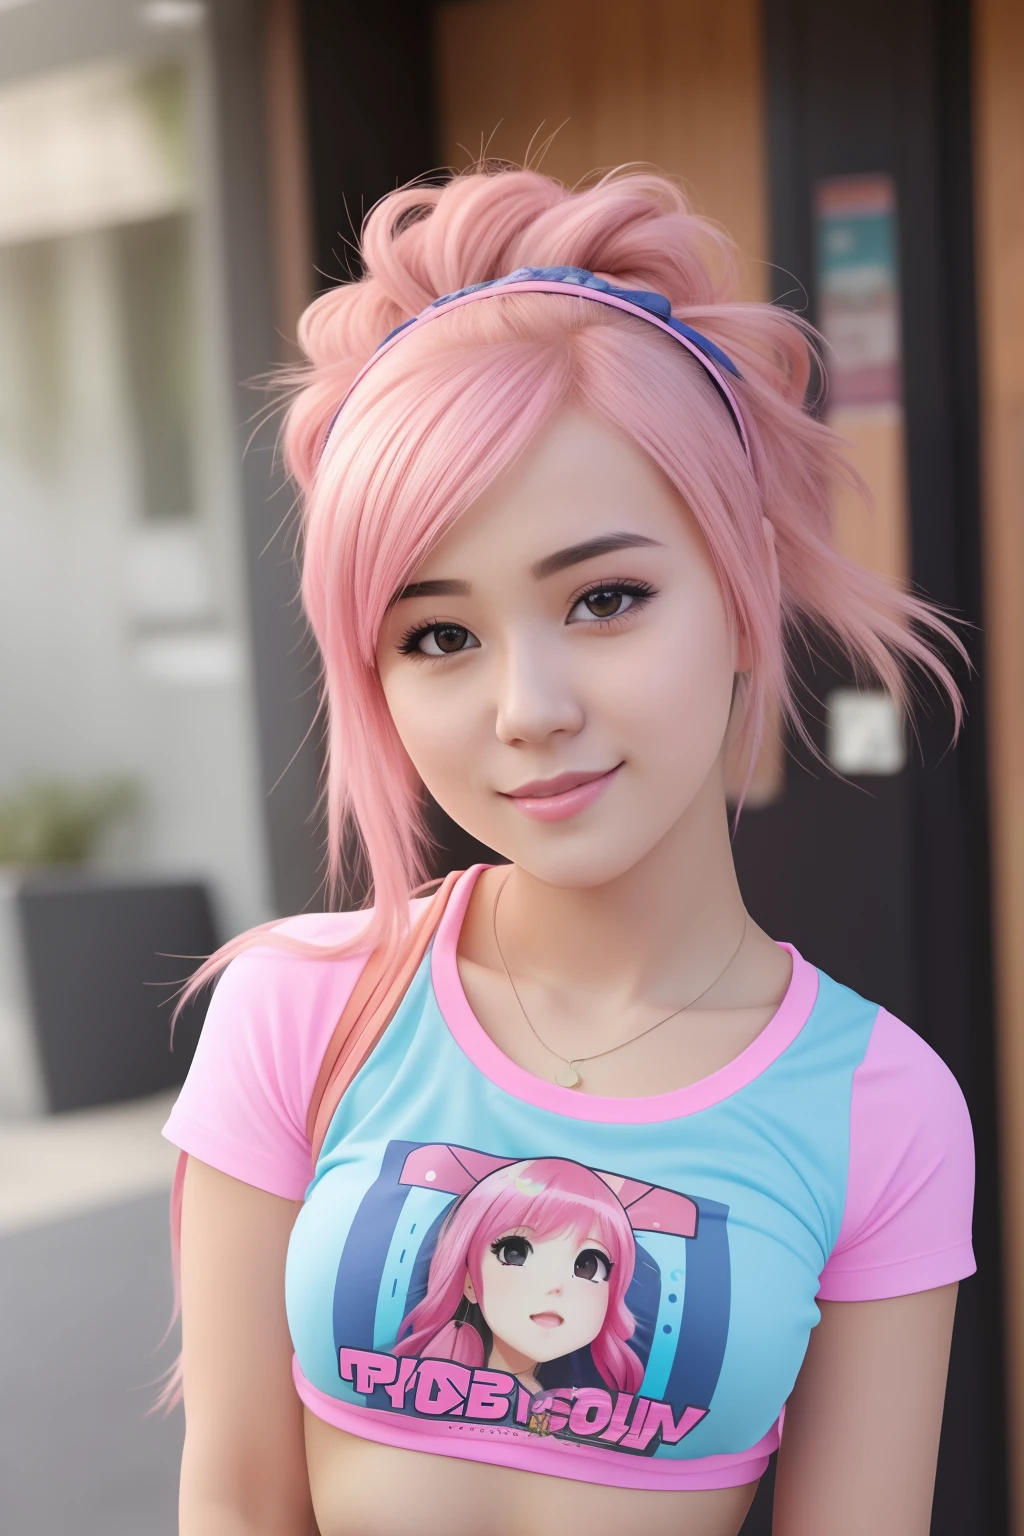 solo, very detailed, detailed face, pokidiffusion, picture of a beautiful girl with pink hair wearing colorfull t-shirt, soft smile, outside in a common place, upper body, deepthroat, suck dick